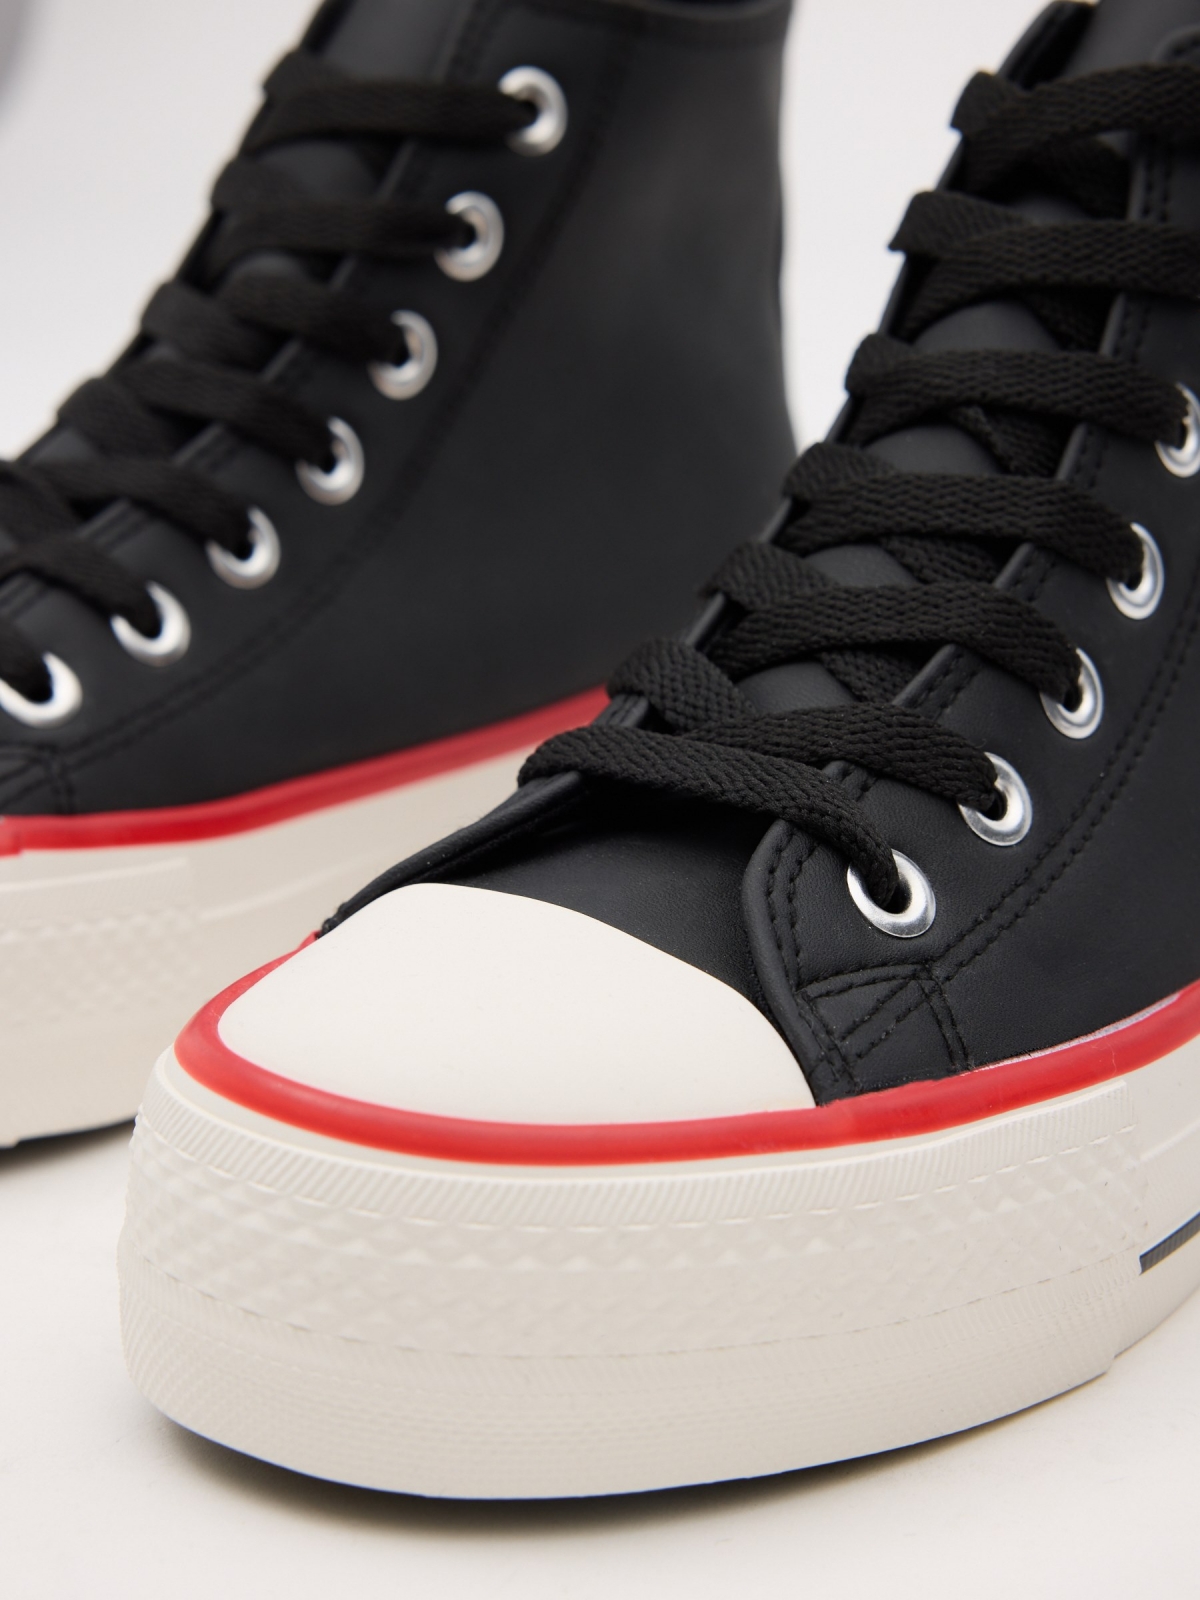 Patent leather boot sneakers black detail view